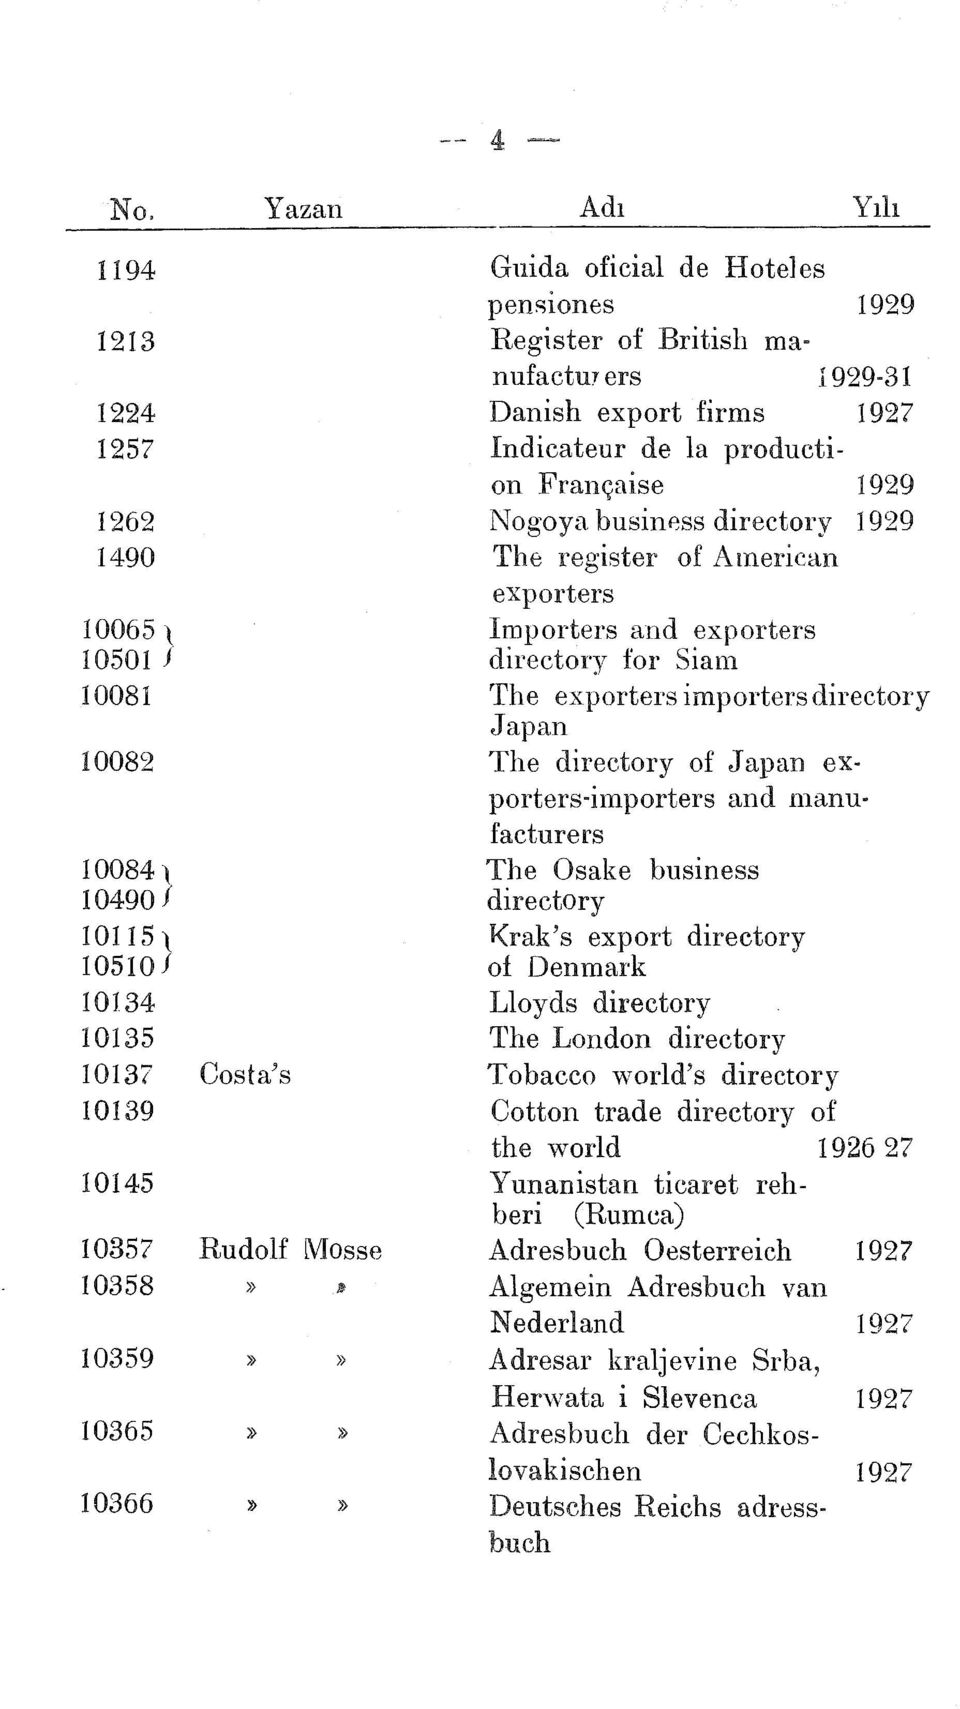 exporters-importers and manufacturers 10084} The Osake business 10490 directory 10115} T<rak's export directory 10510 of Denmark 10134 Lloyds directory 10135 The London directory 10137 Costa's